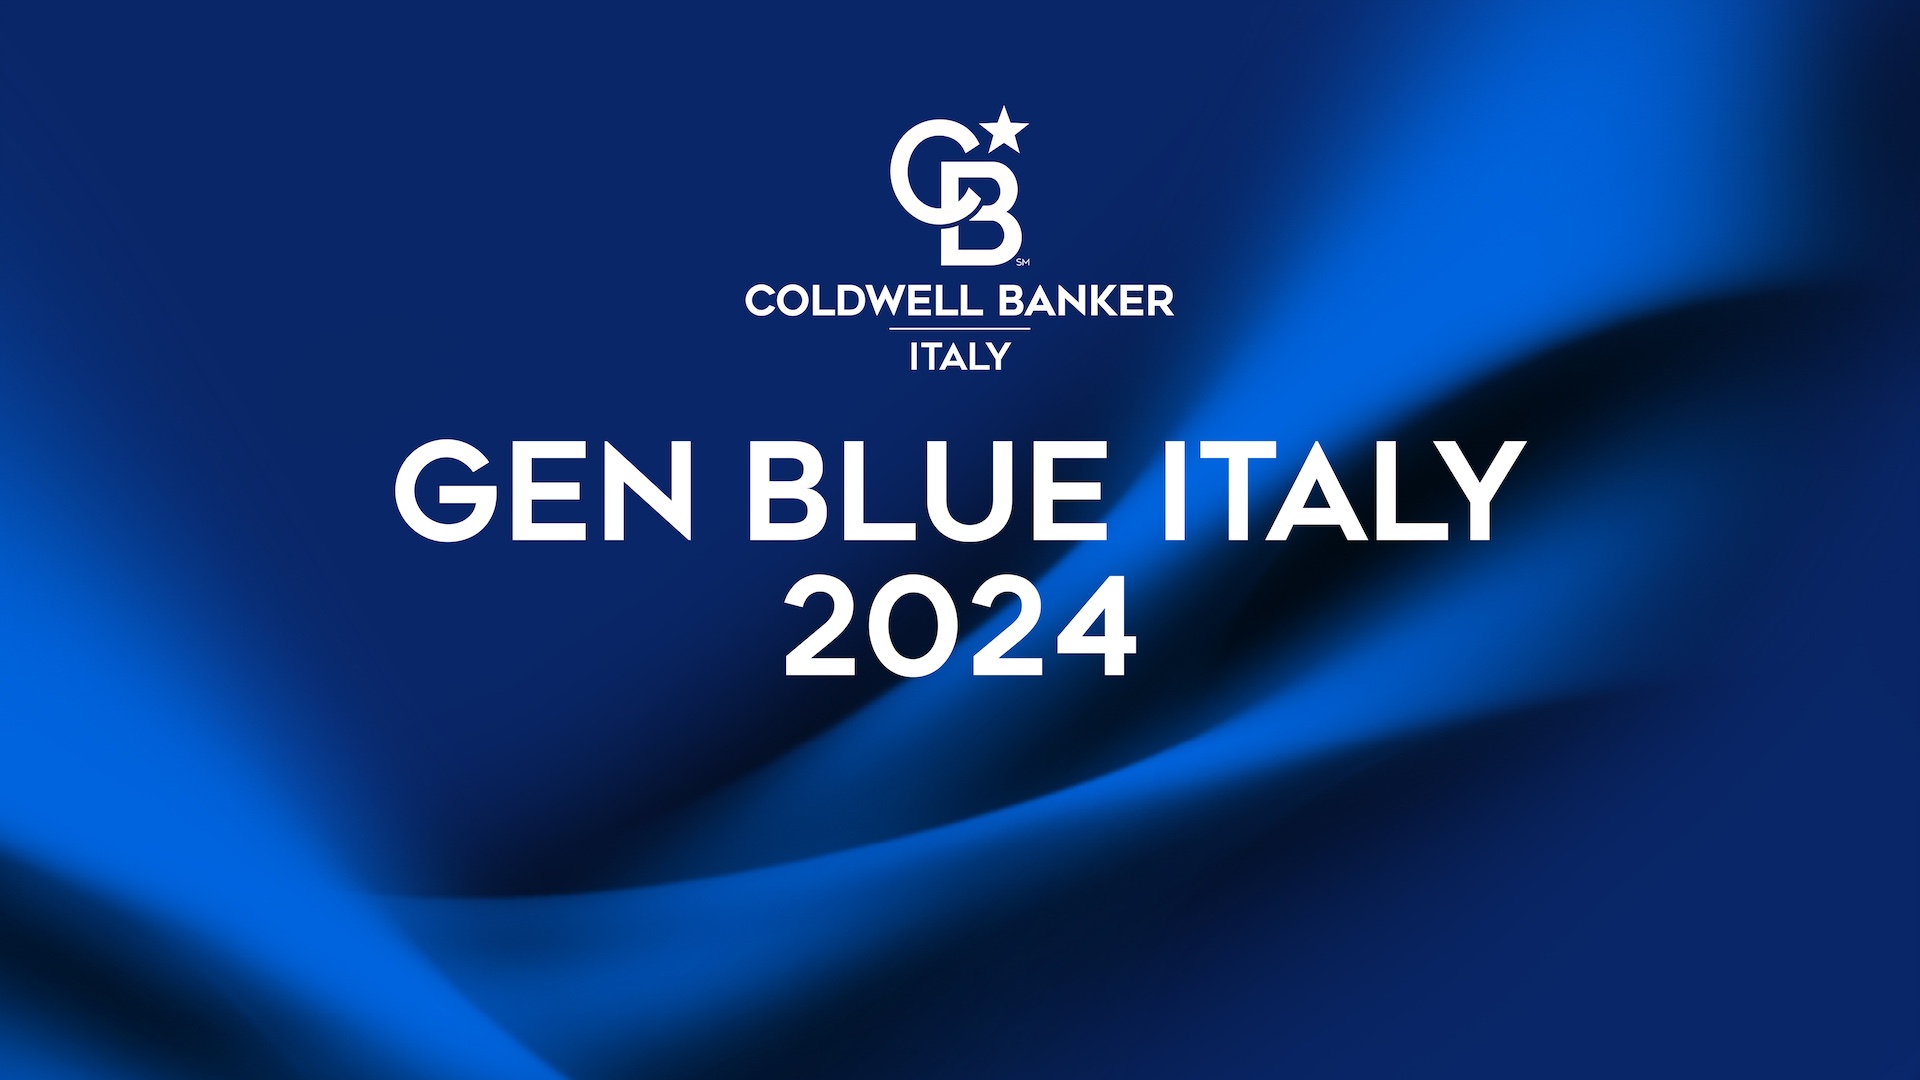 Gen Blue Italy 2024, Coldwell Banker,